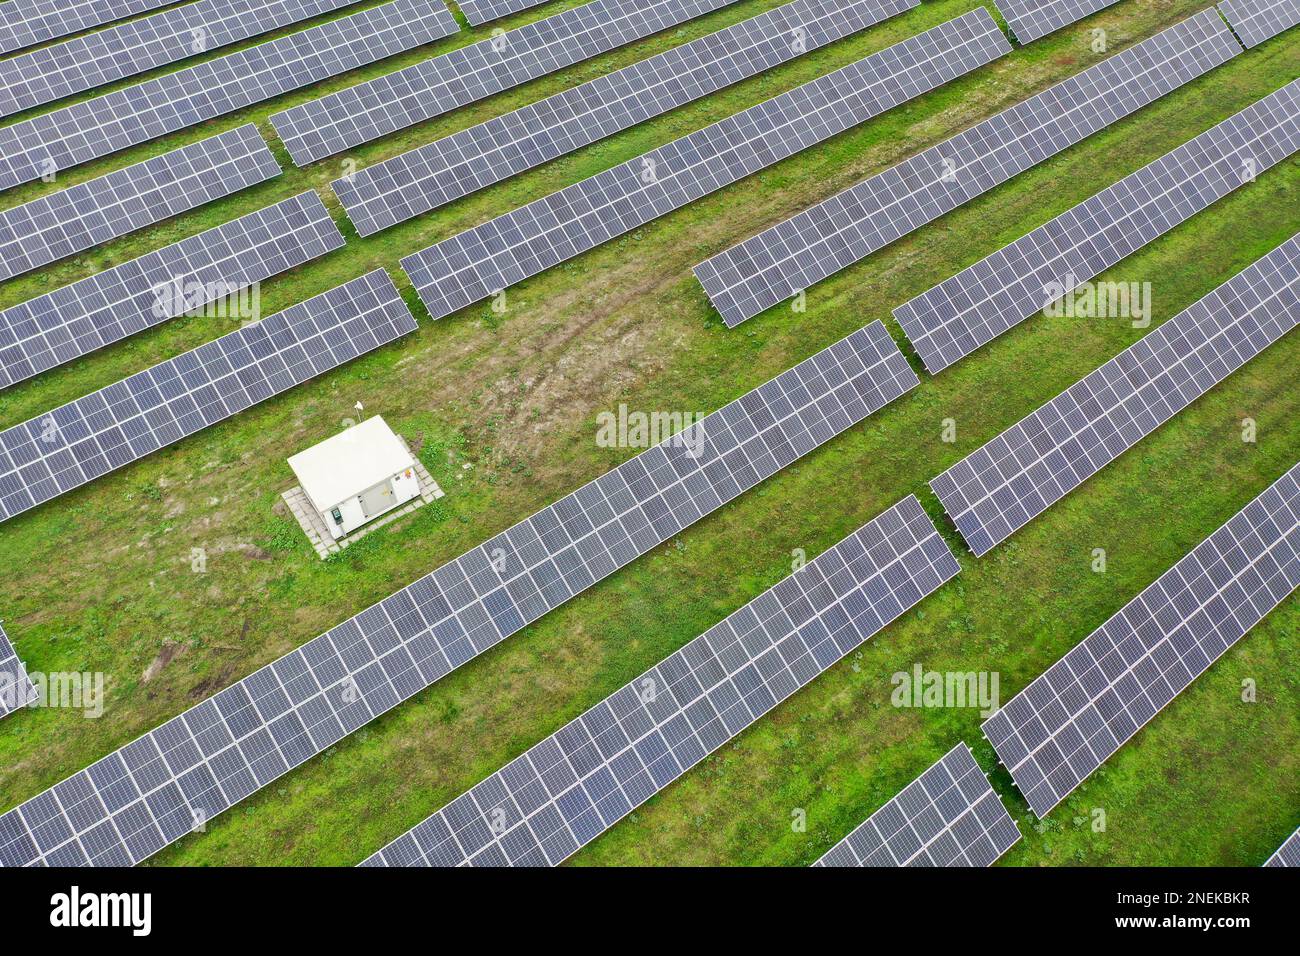 Aerial view of the solar power plant from above. Converting solar energy into electricity from large solar panels. Solar panels in Europe, Hungary. Stock Photo